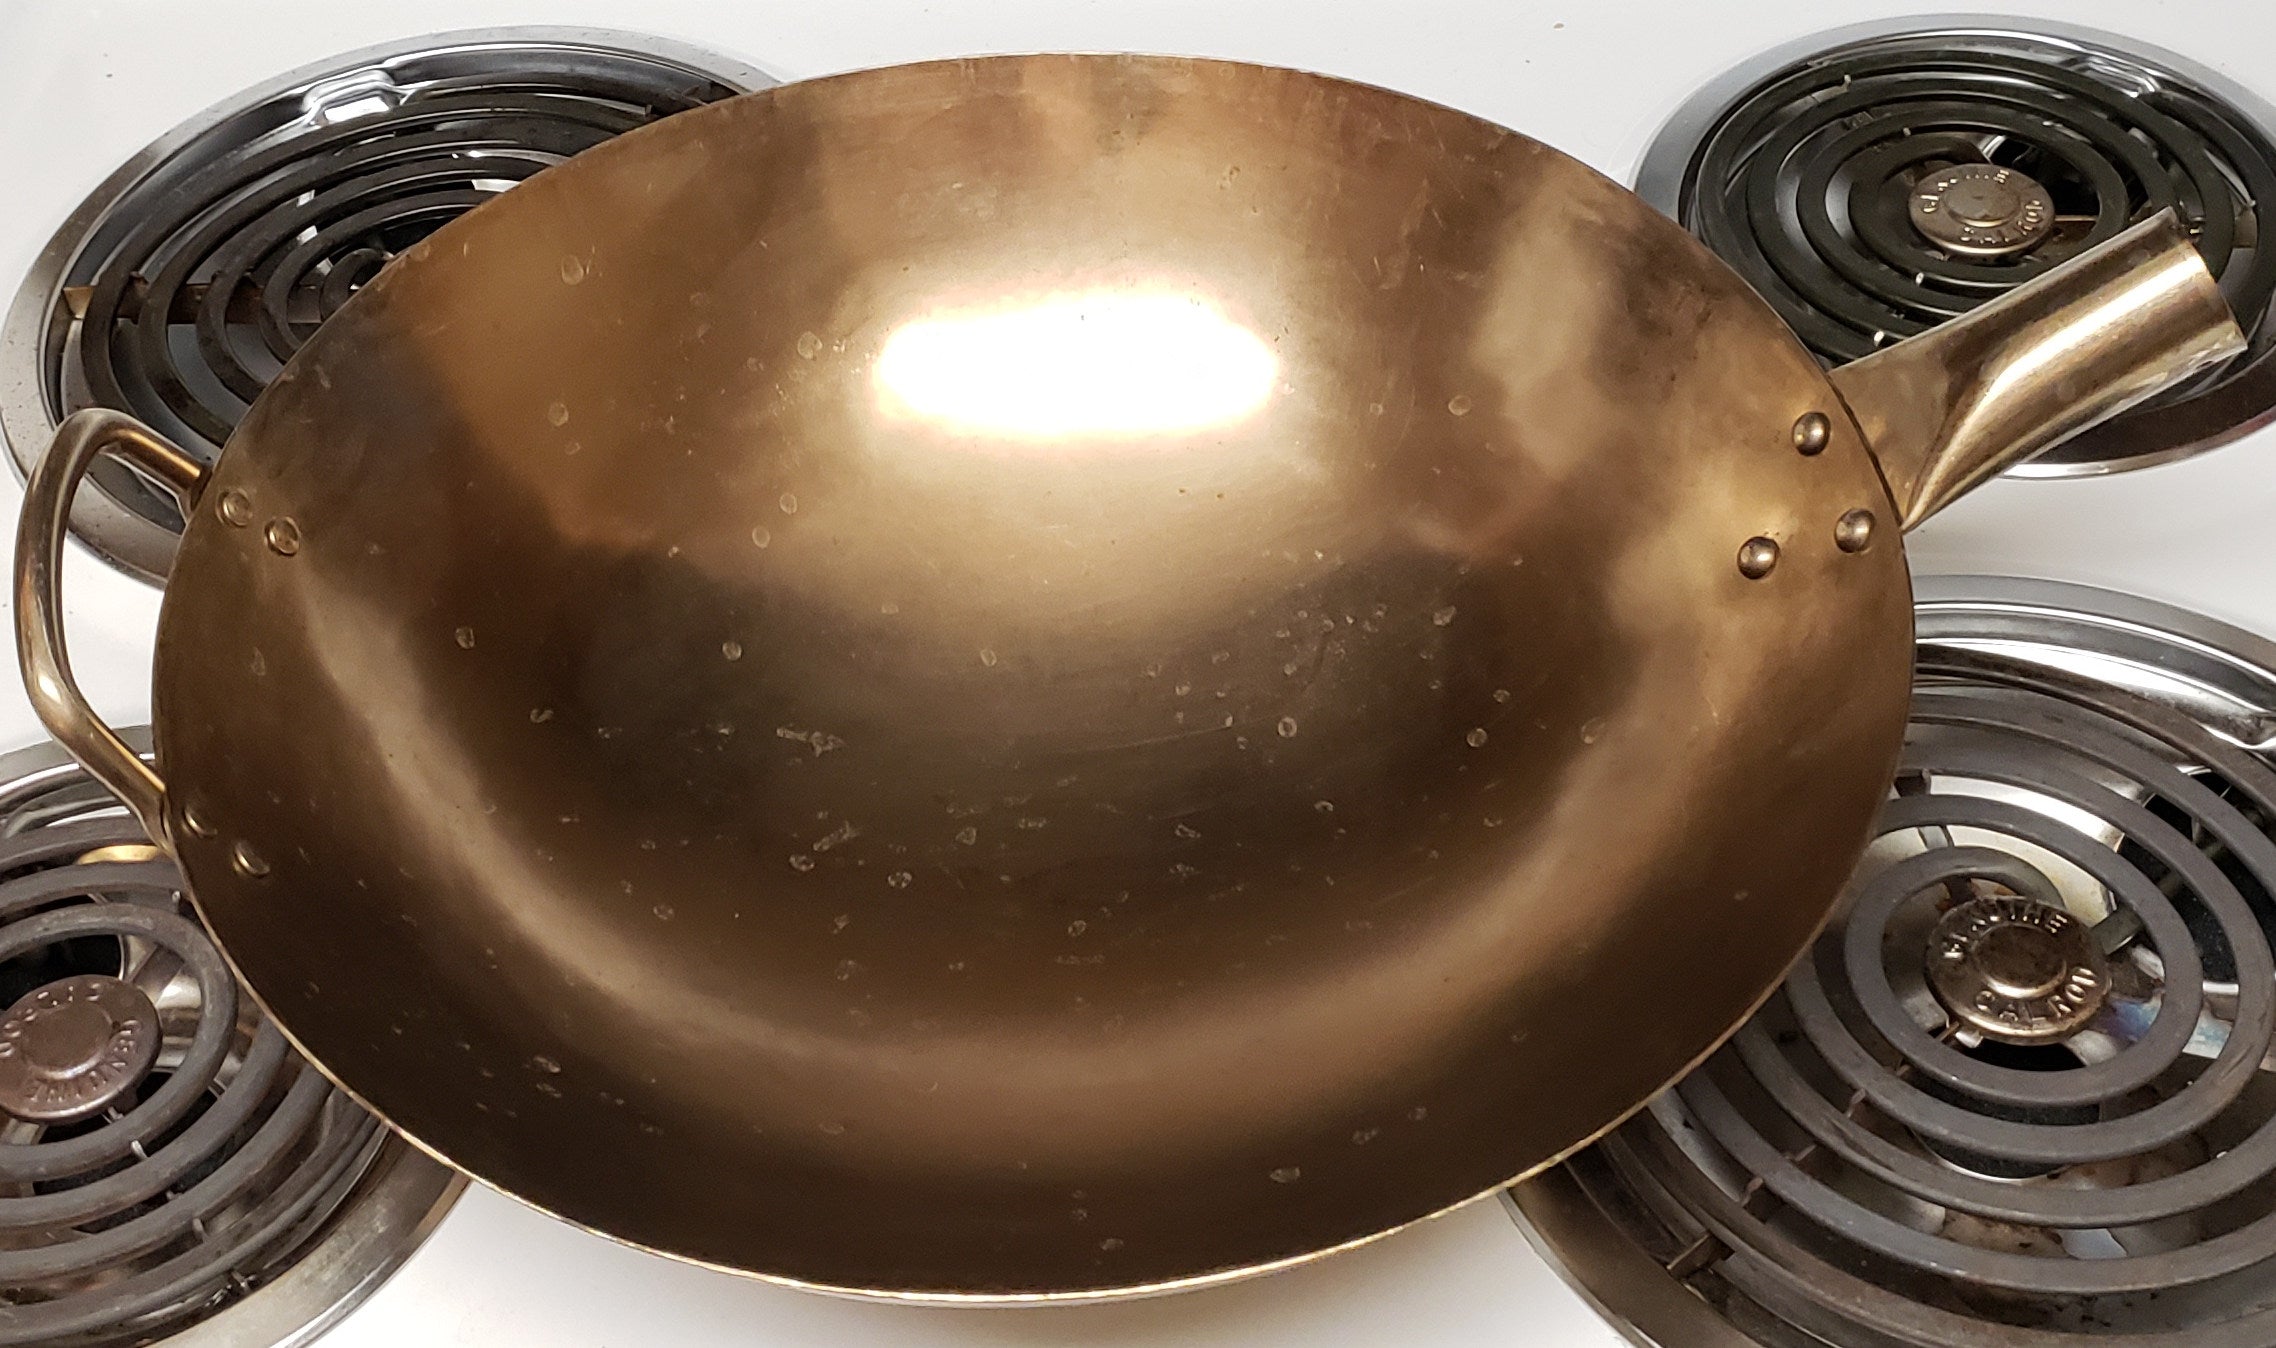 Fail-proof way to season a to season a wok in oven : A happy – mammafong